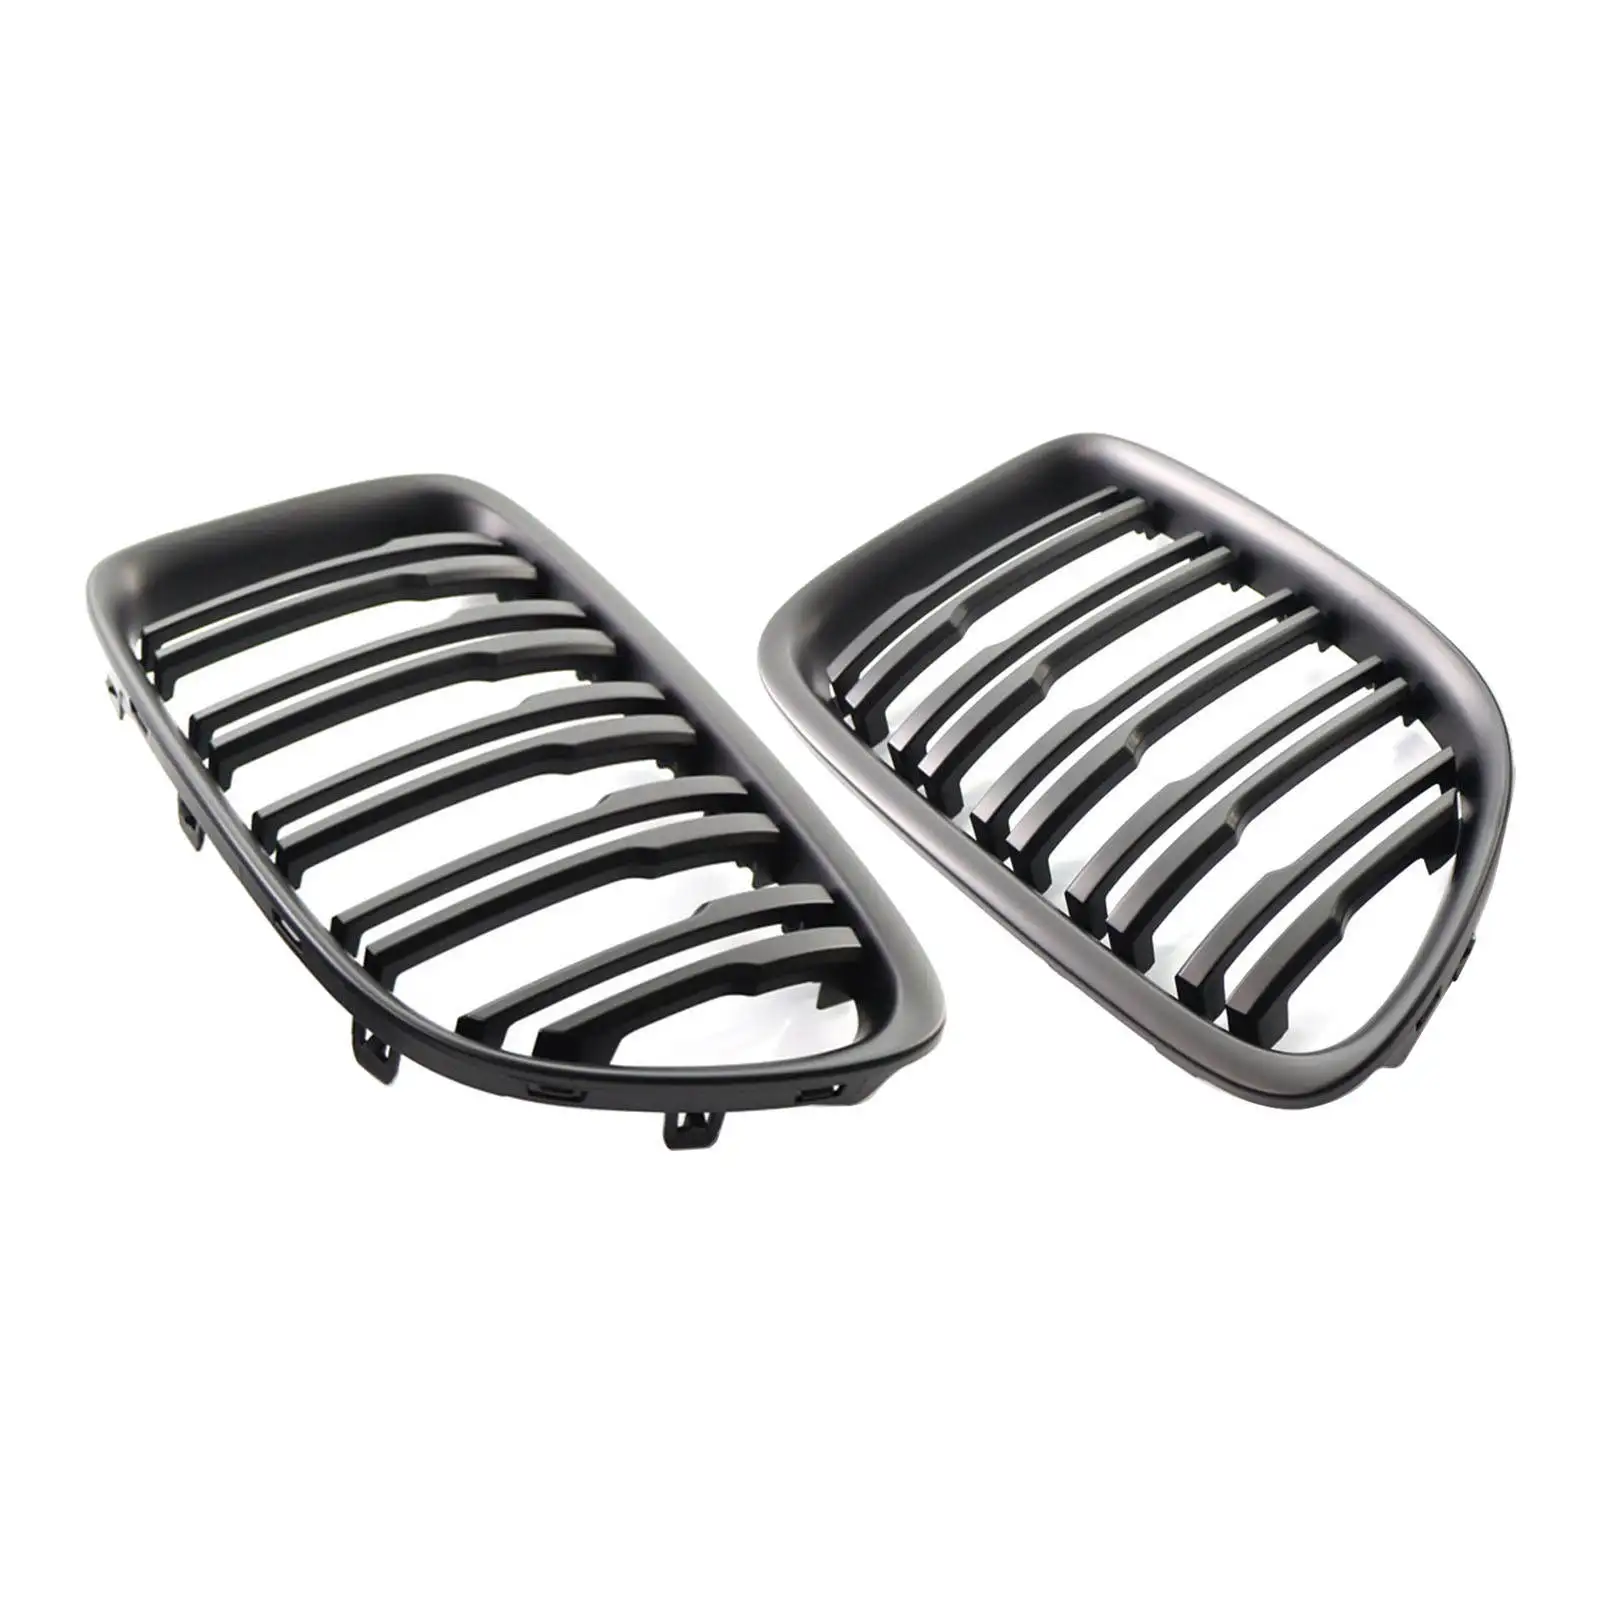 2x Grille Front Compatible for  E84 X1 20i 25i 28i 2009 2011 2010 2013 2014 Double Slat Bumper Racing Grill Matte Black